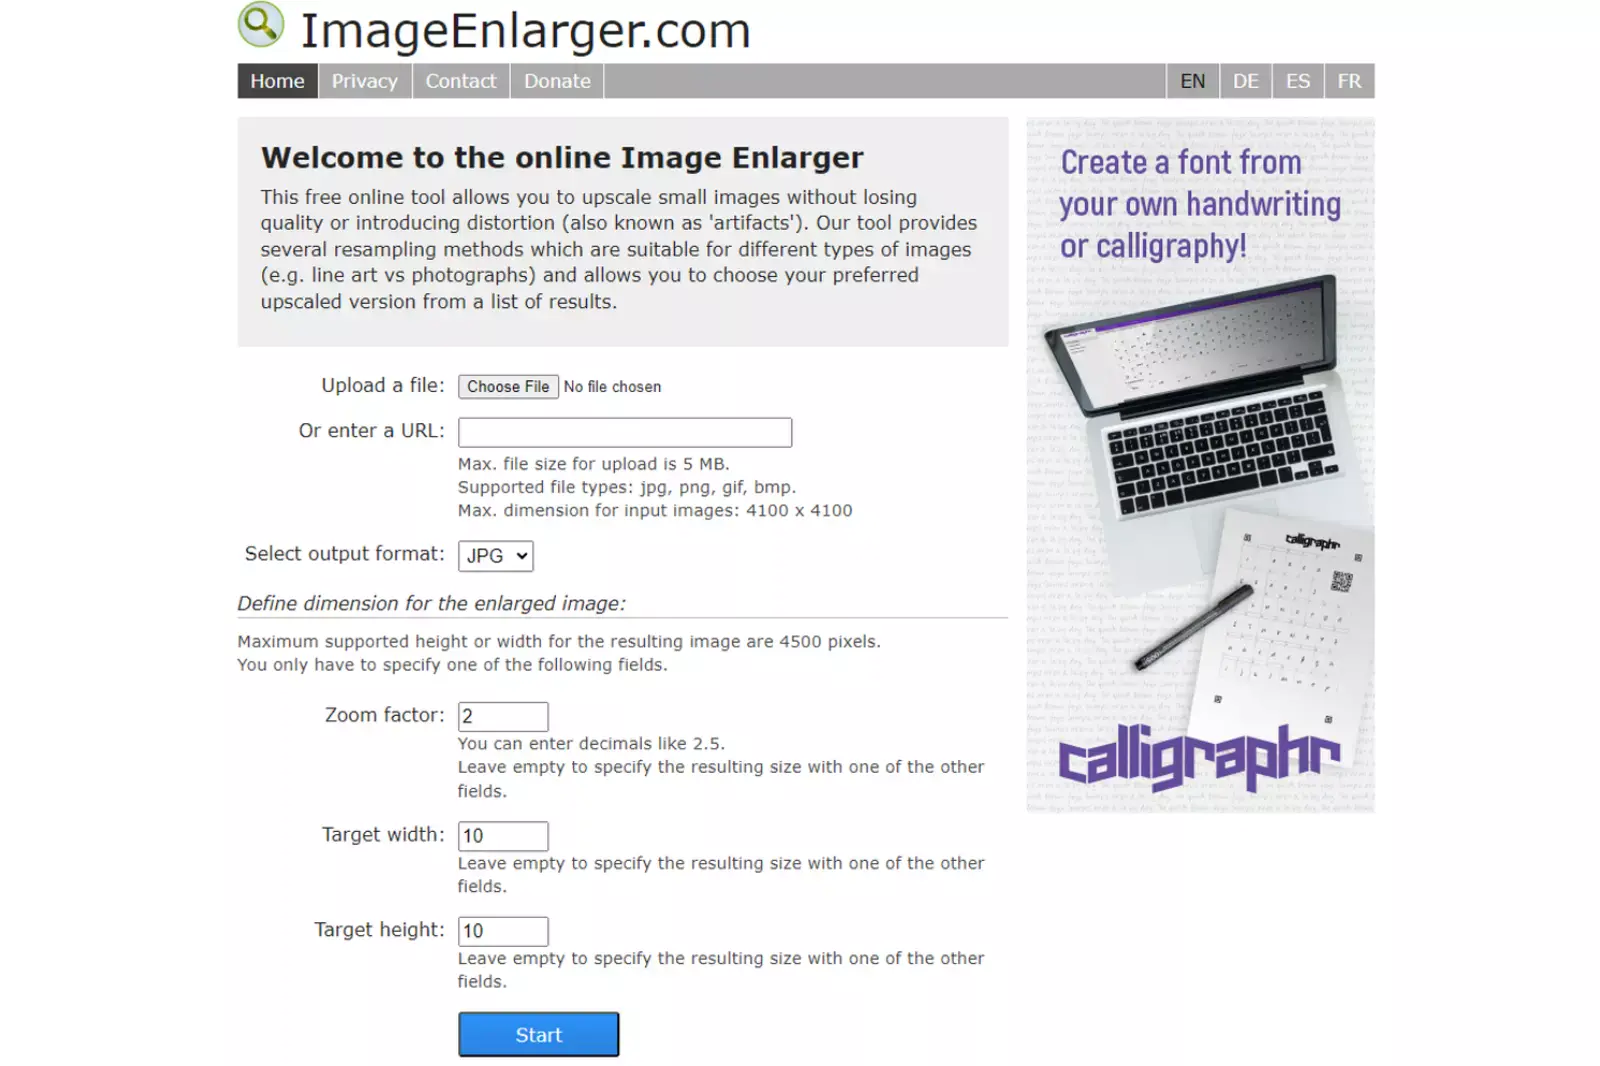 Home Page of ImageEnlarger.com